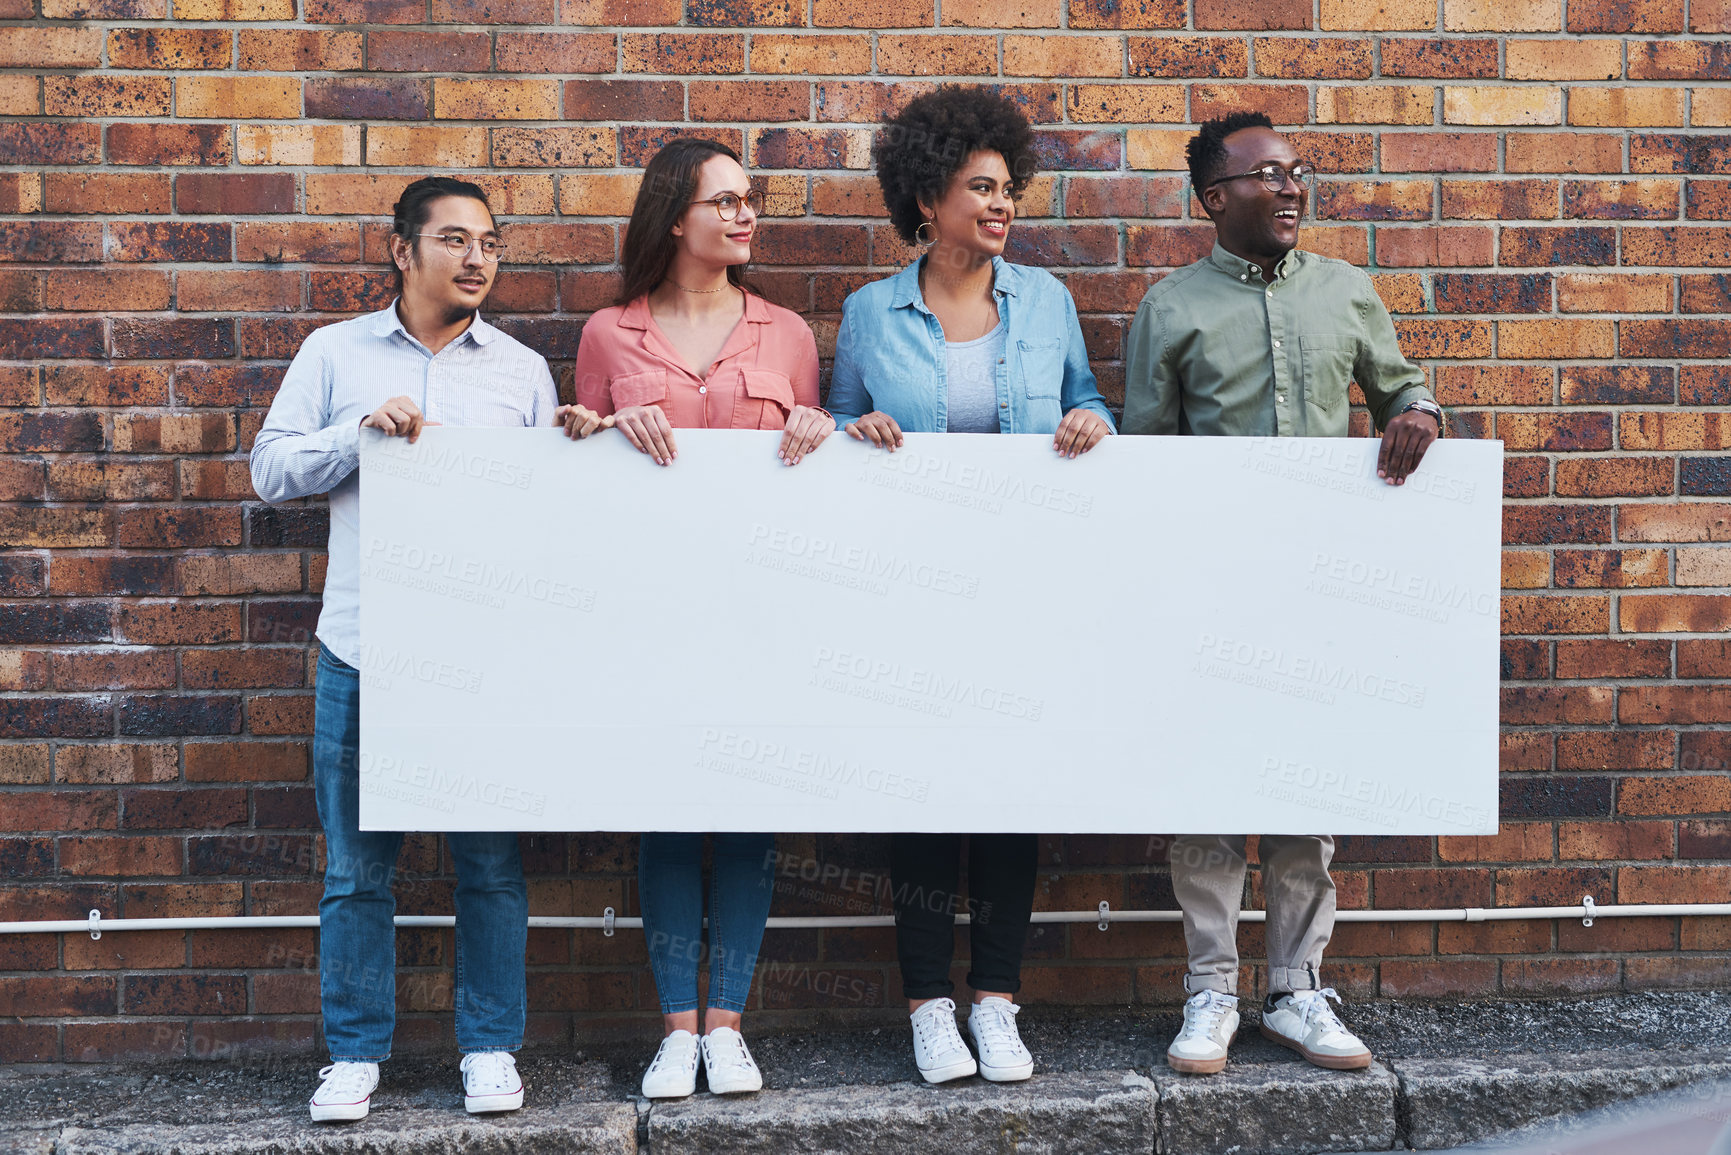 Buy stock photo Shot of a group of young people holding a blank banner against an urban background outdoors